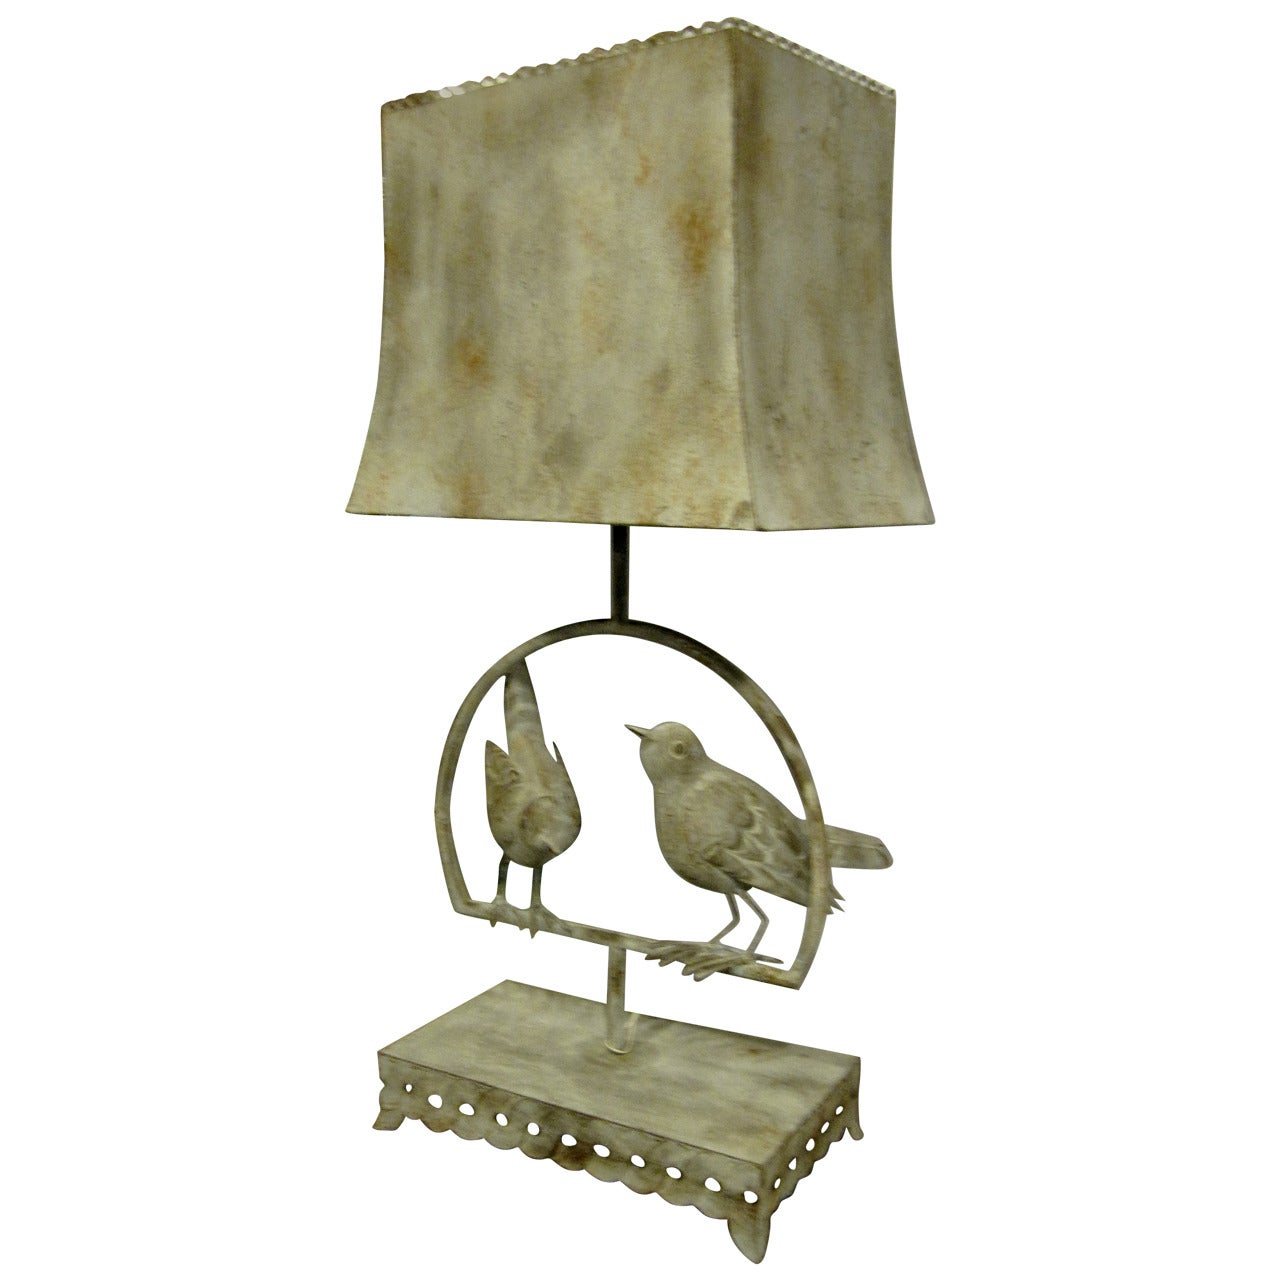 Tole Bird Lamp with Tole Shade in Verdi Gris Finish